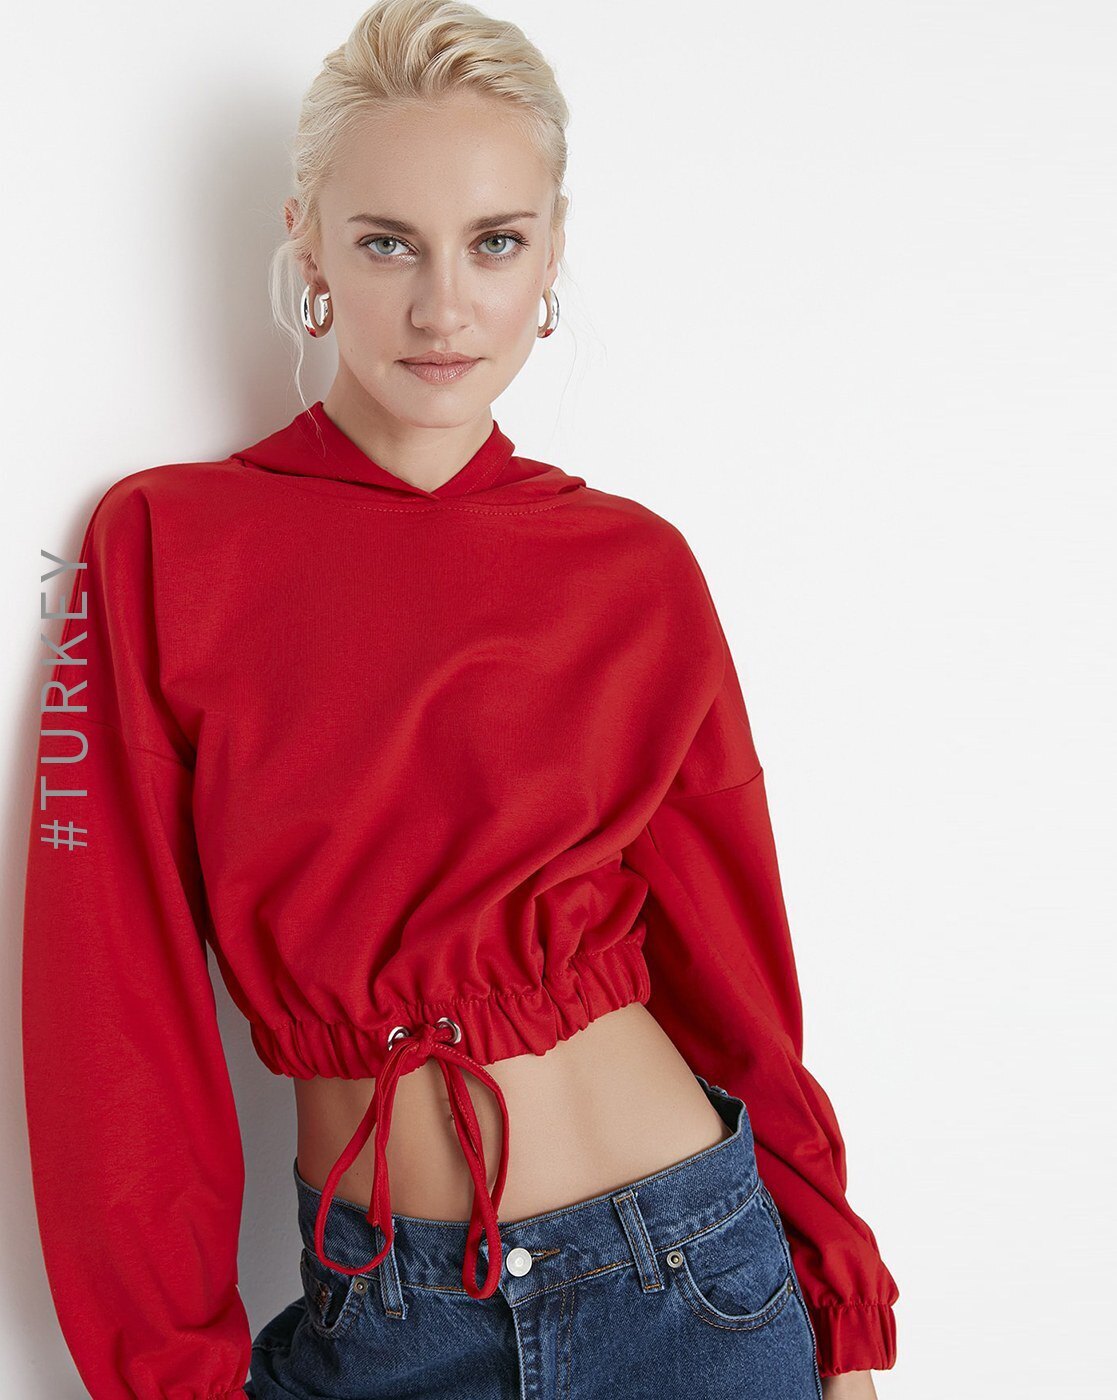 Cropped Hoodie with Drawstring Fastening